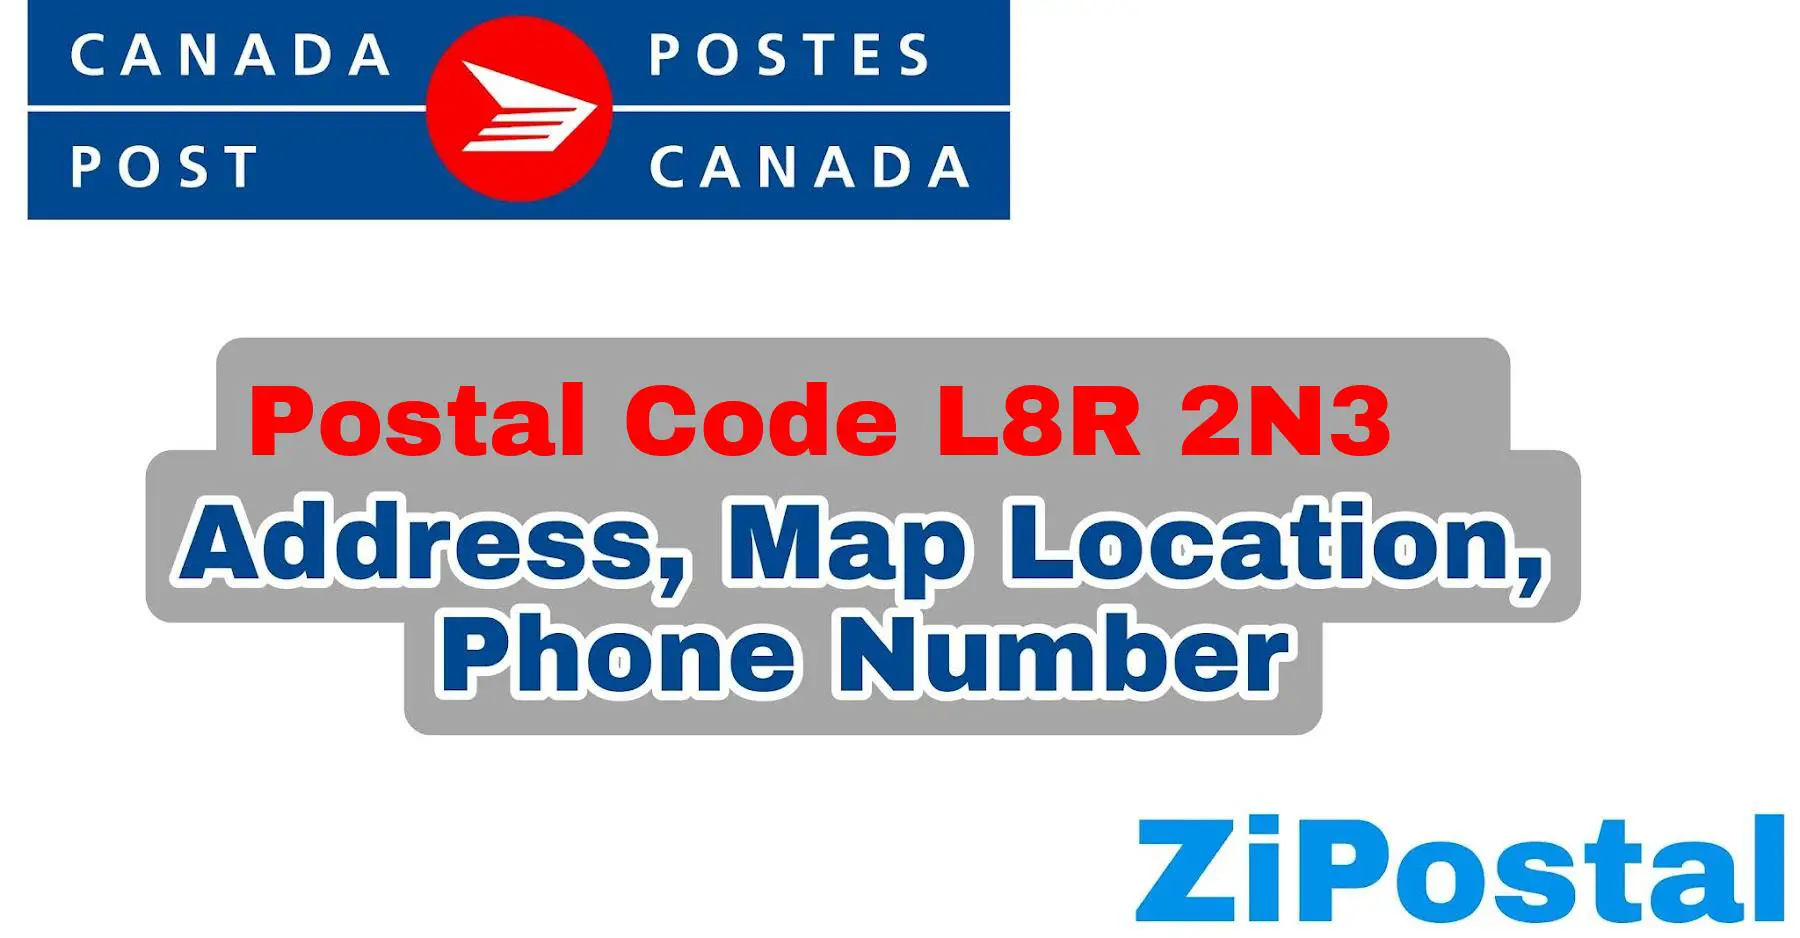 Postal Code L8R 2N3 Address Map Location and Phone Number